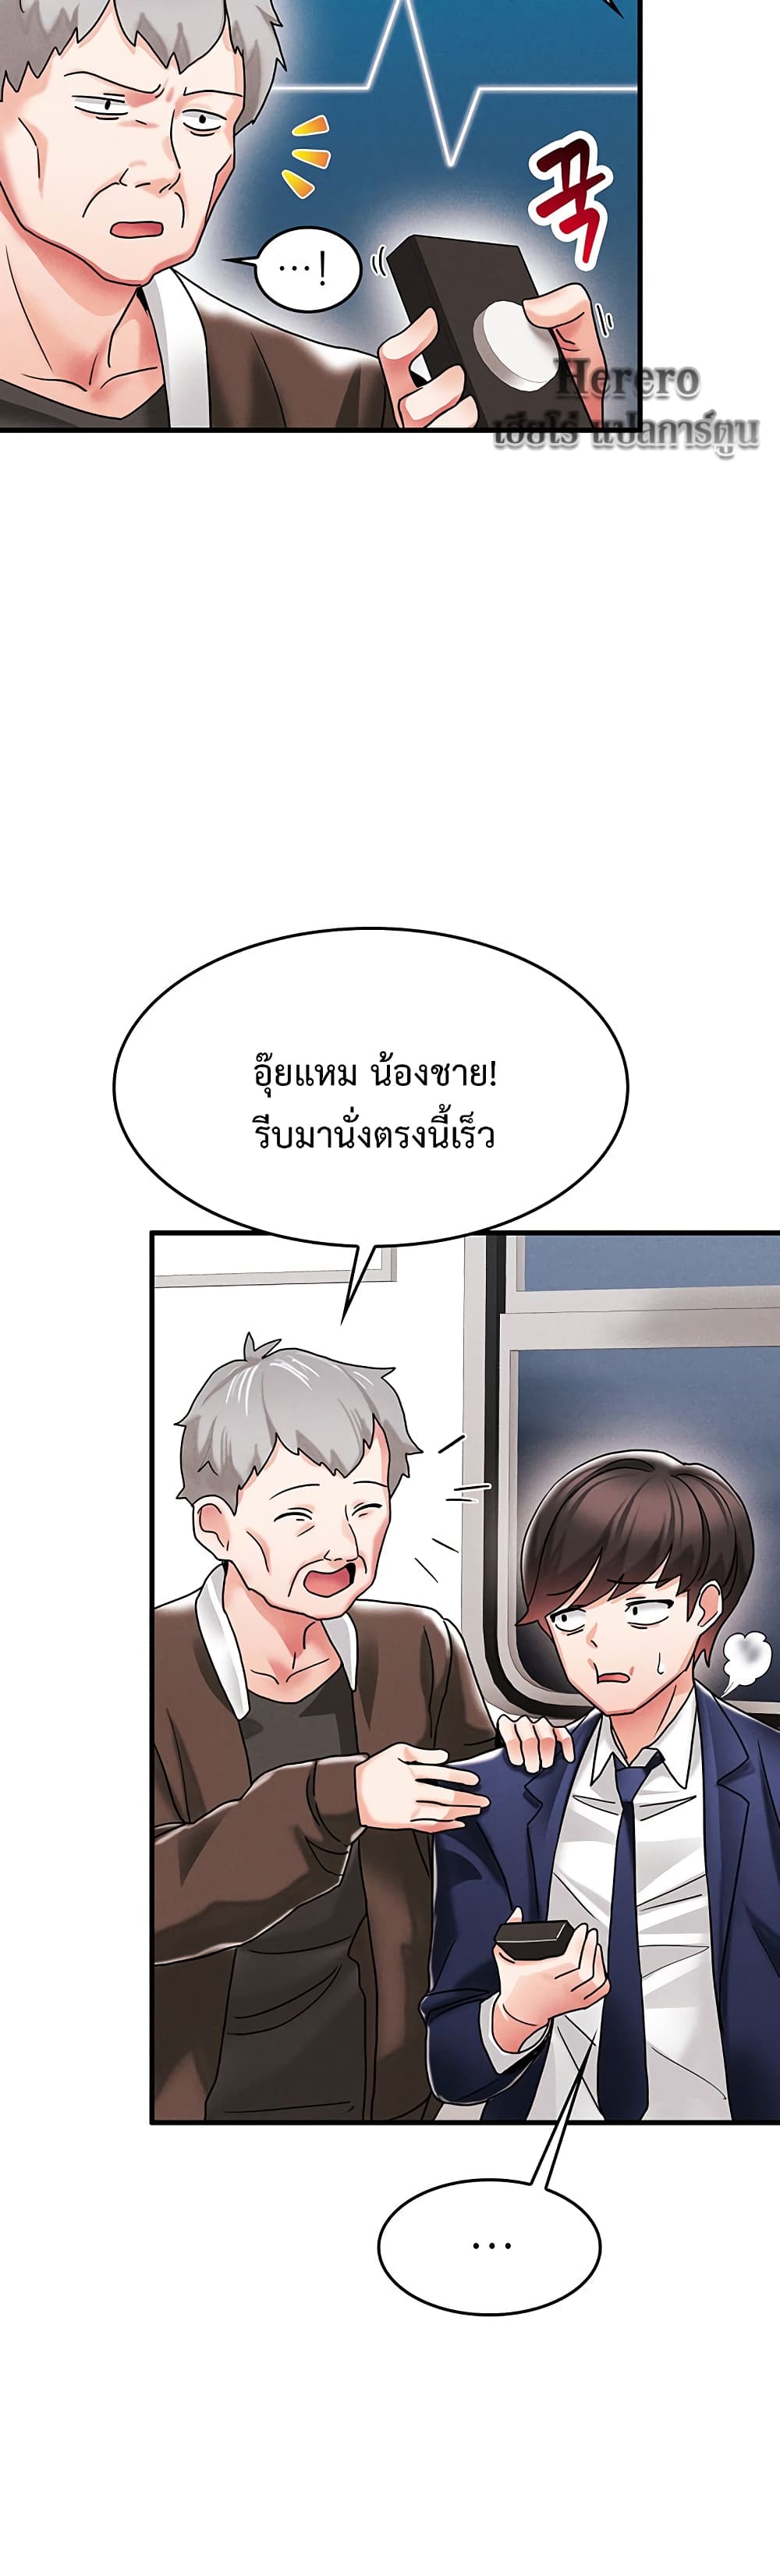 Relationship Reverse Button: Let’s Make Her Submissive 3 ภาพที่ 15